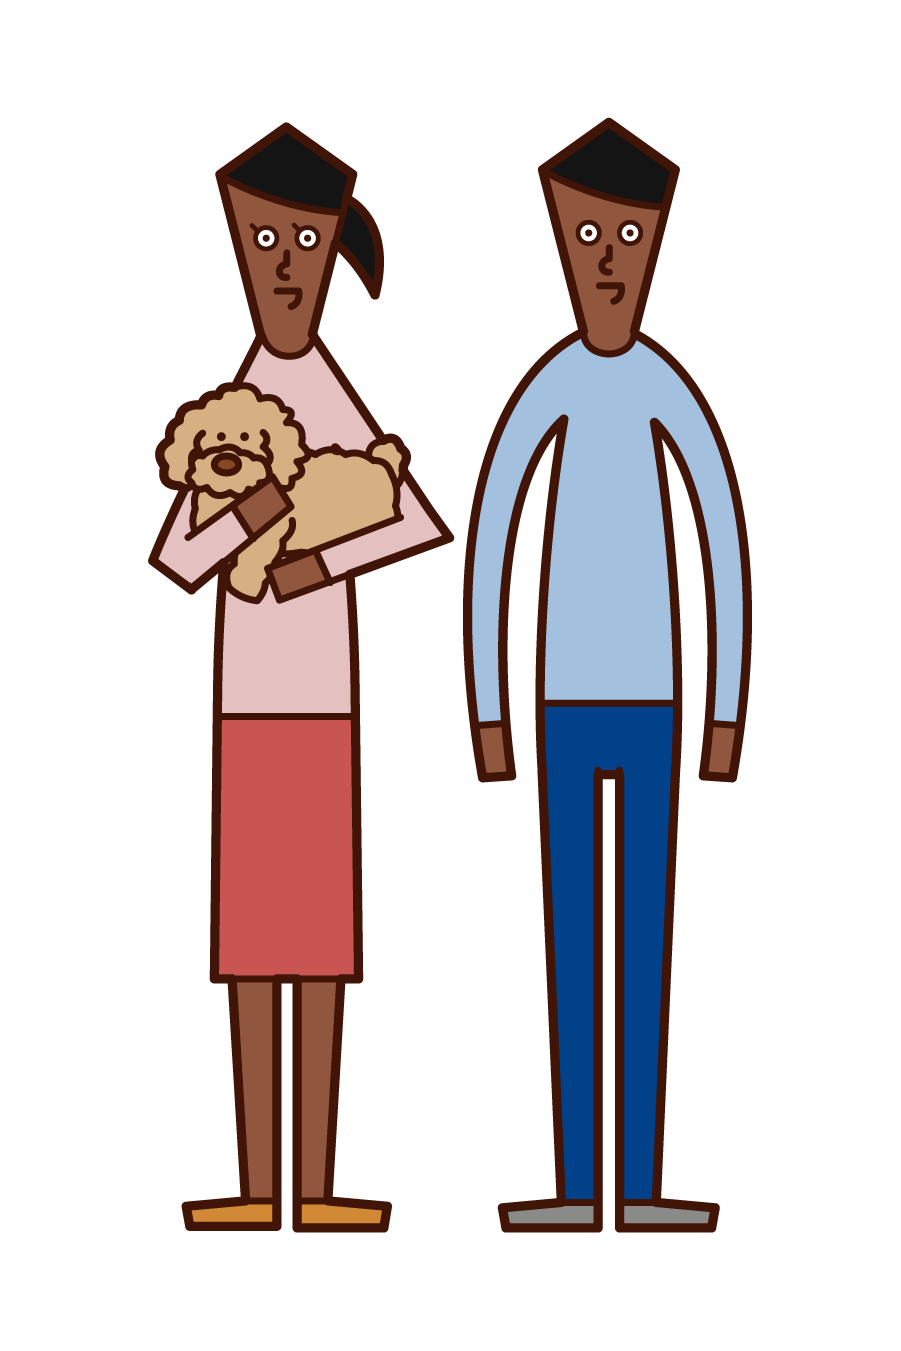 Illustration of a couple with a dog